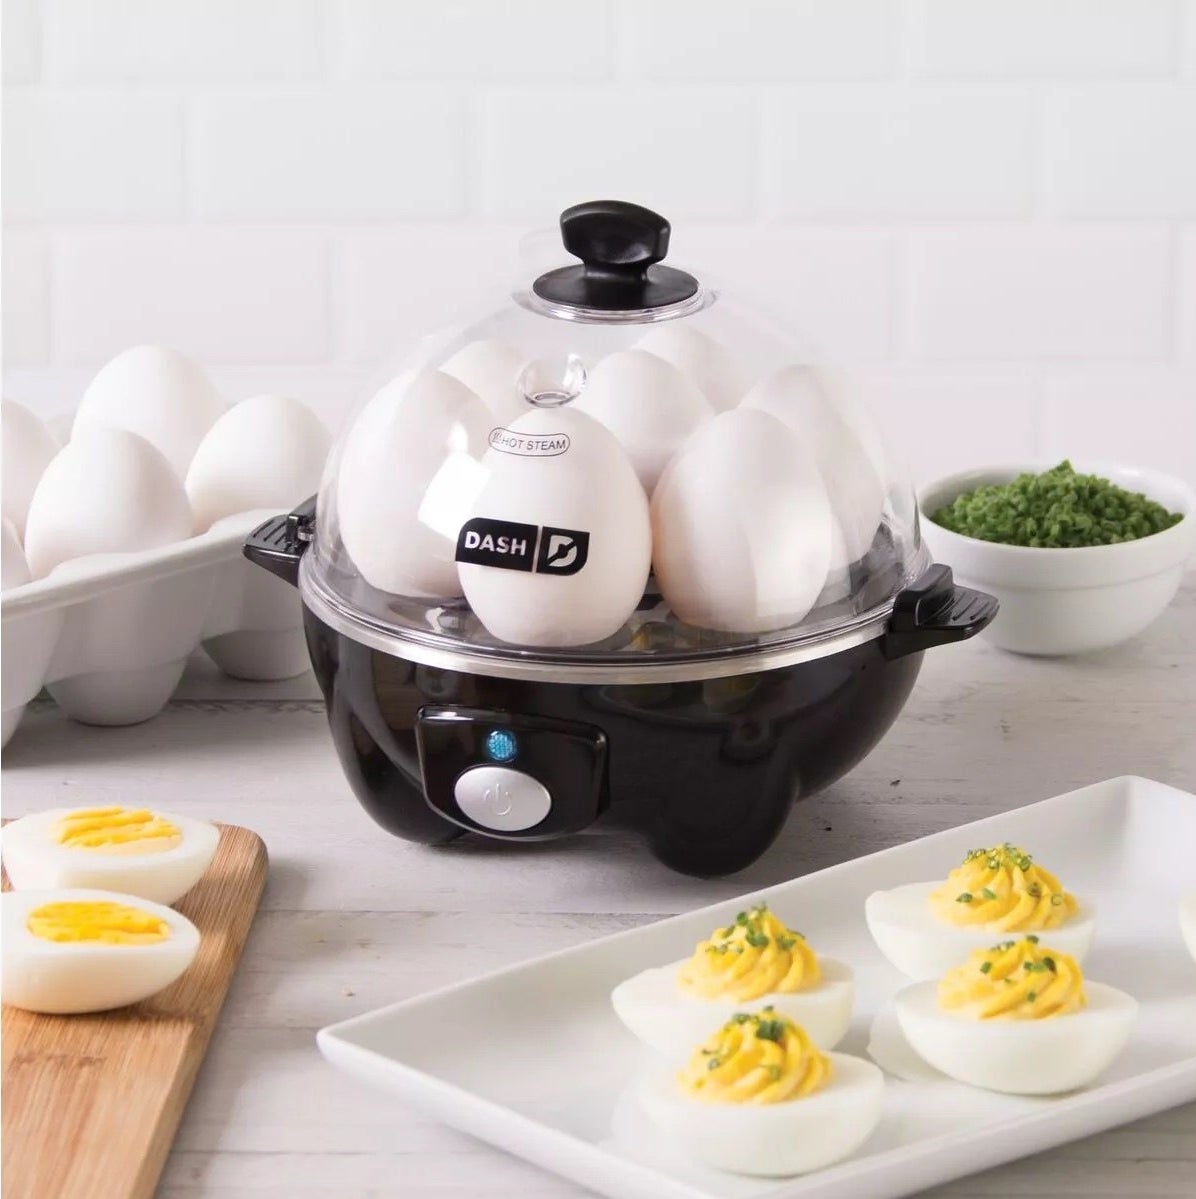 A black egg cooker with deviled eggs